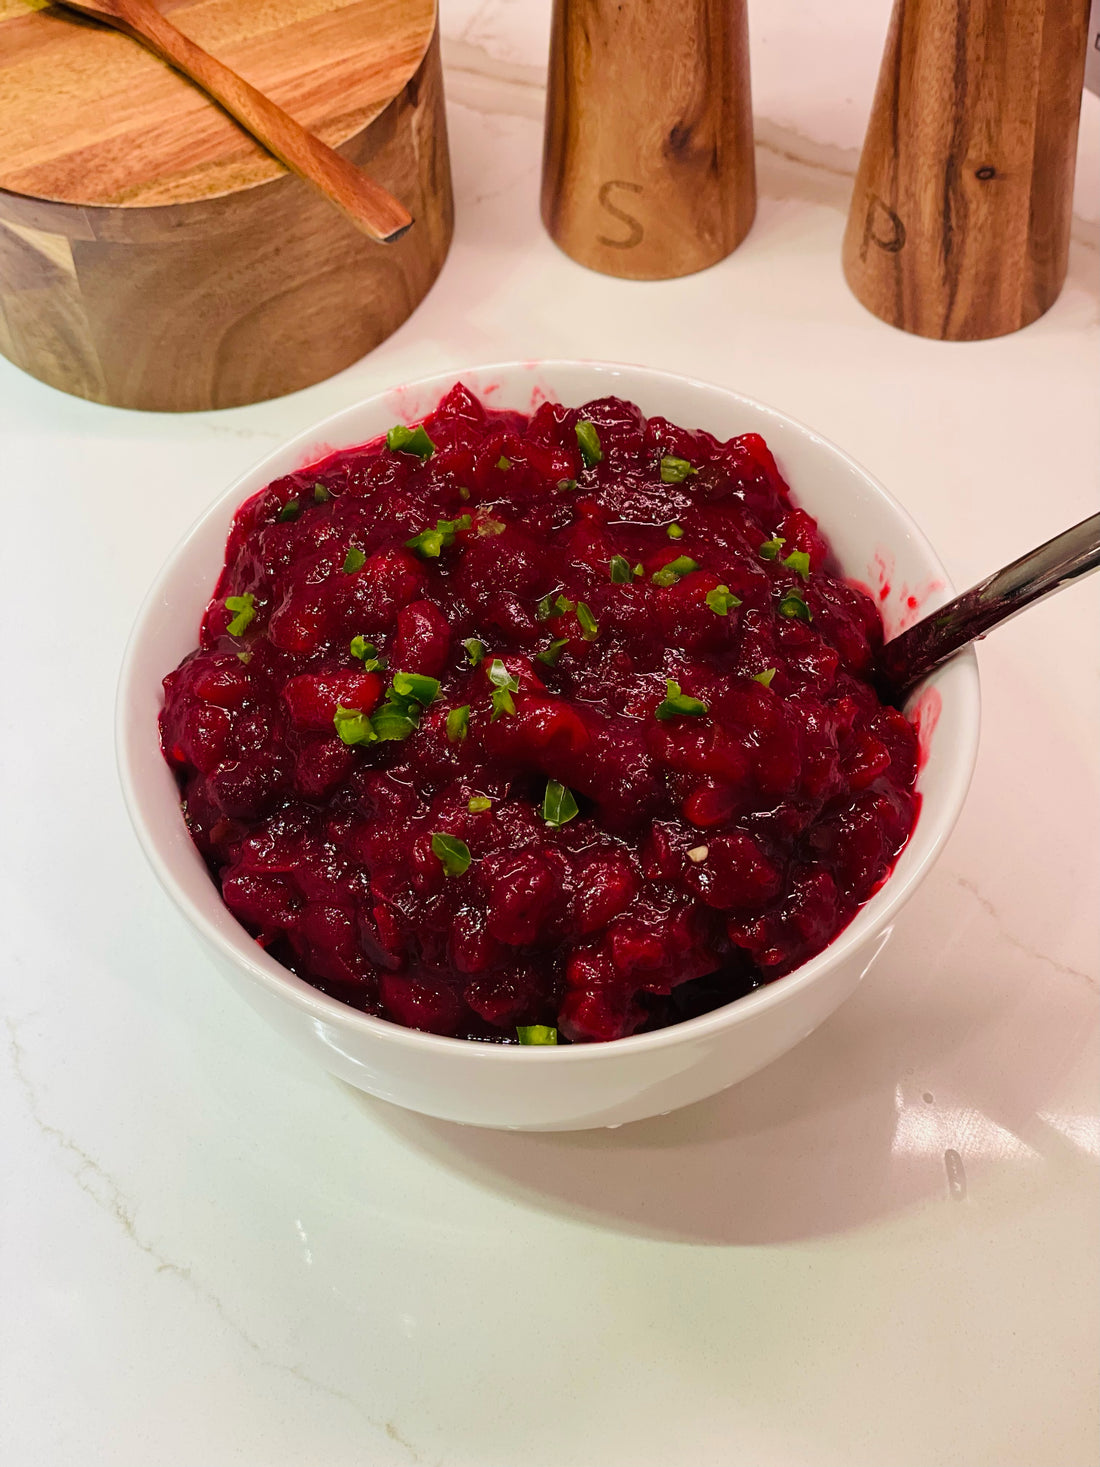 Healthy is Delish: Homemade Spiced Cranberry Sauce